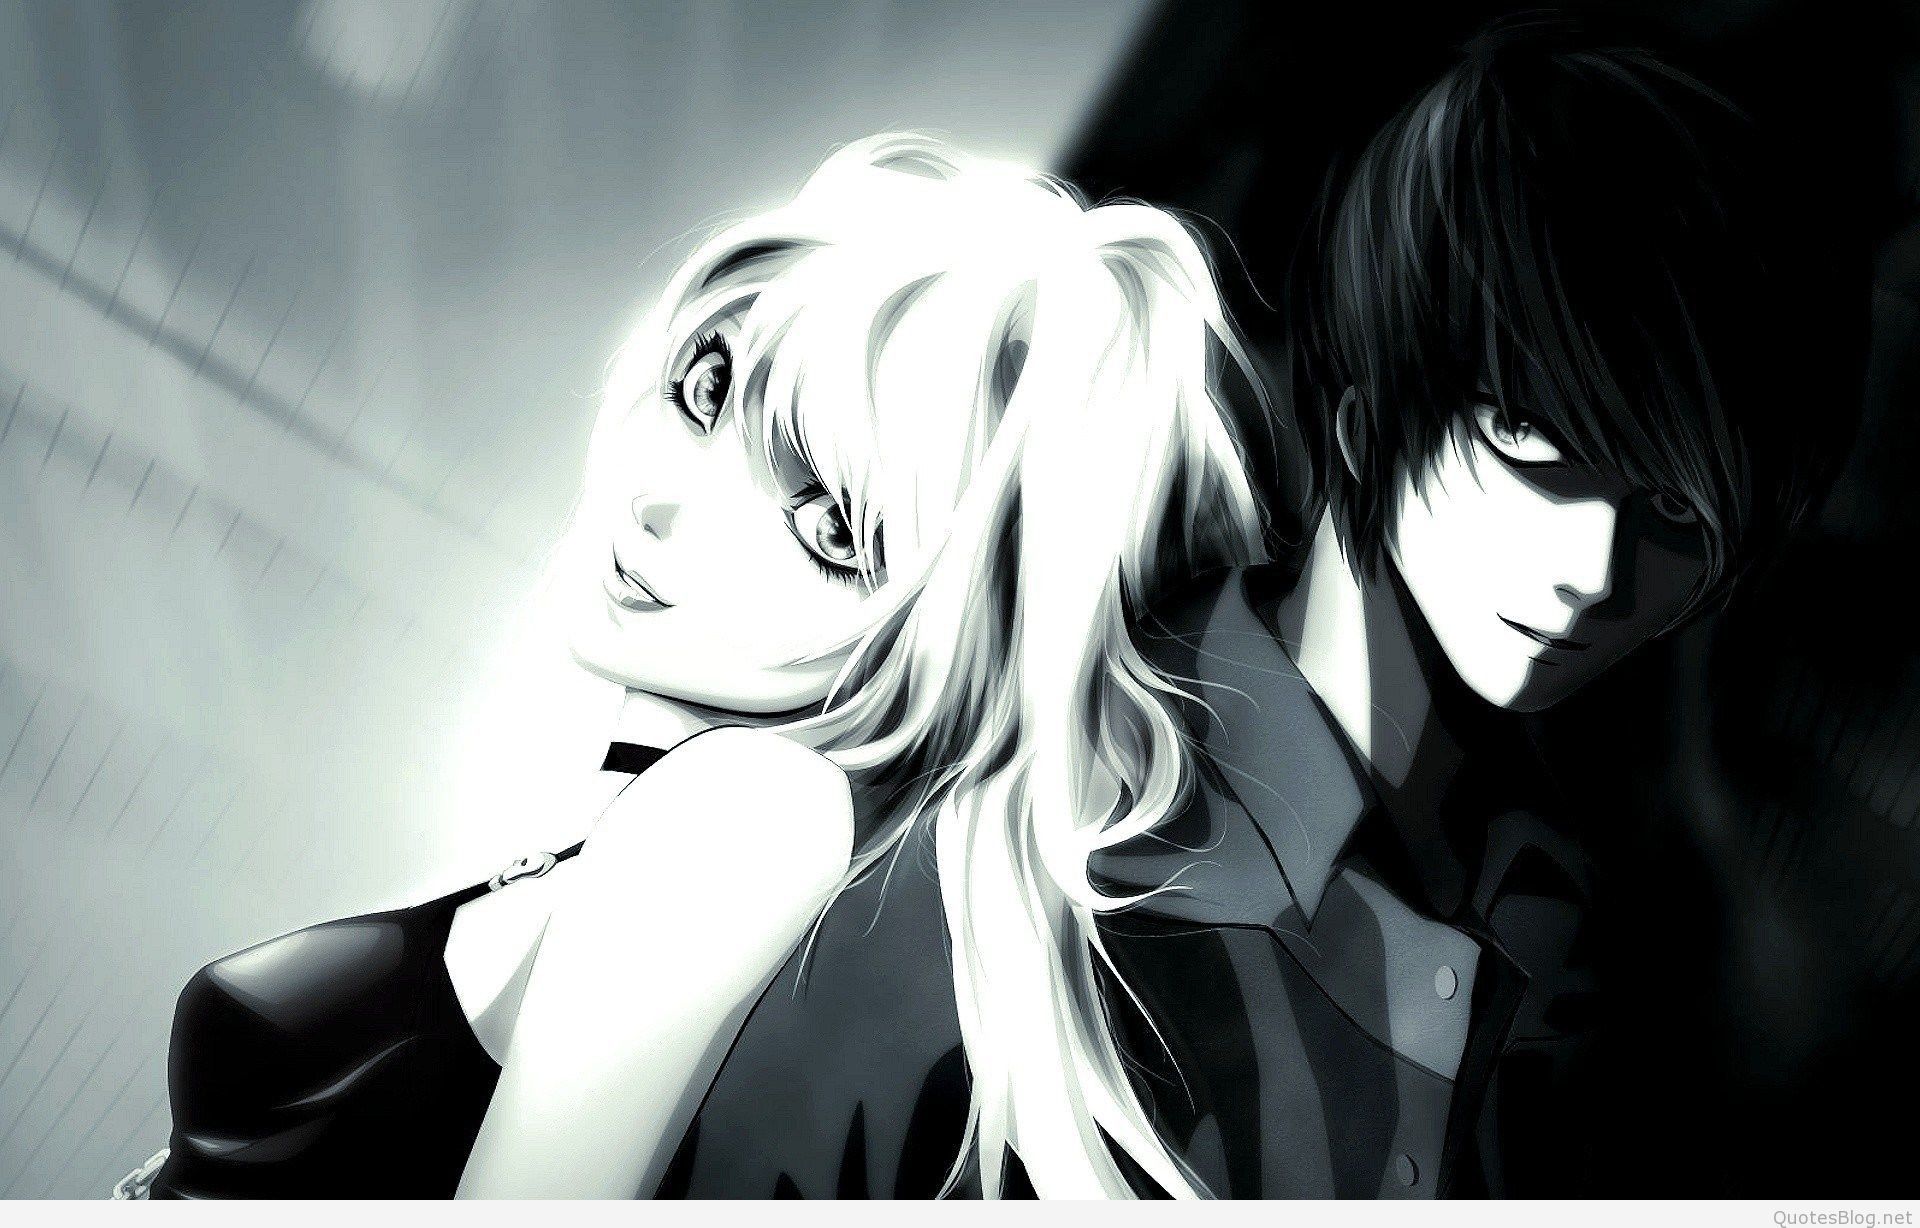 Black and White Anime Couple Wallpapers on WallpaperDog